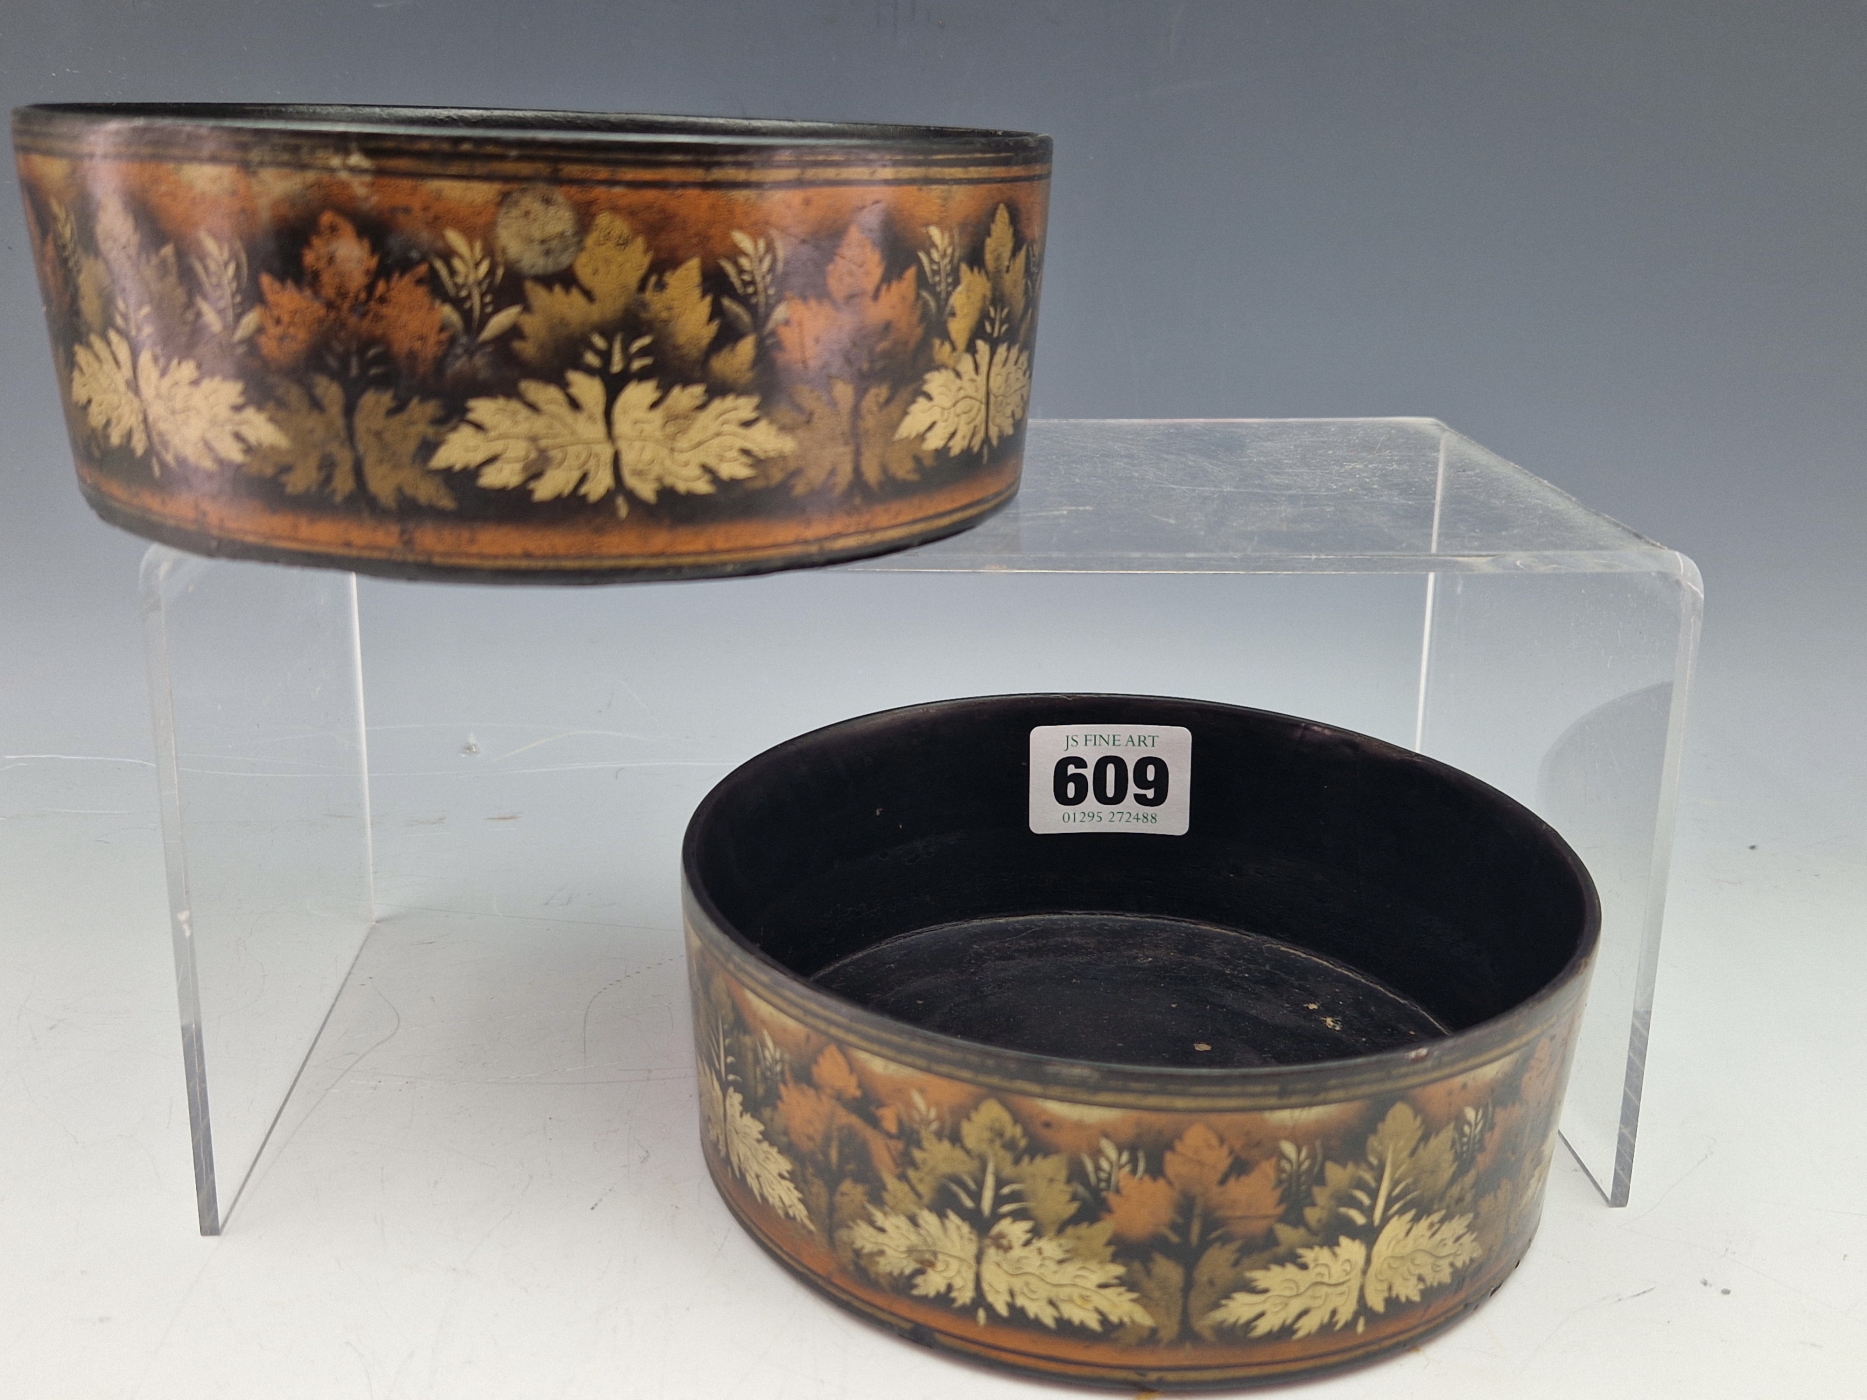 A PAIR OF BLACK PAPIER MACHE WINE COASTERS, THE EXTERIORS GILT IN THREE TONES WITH LEAVES